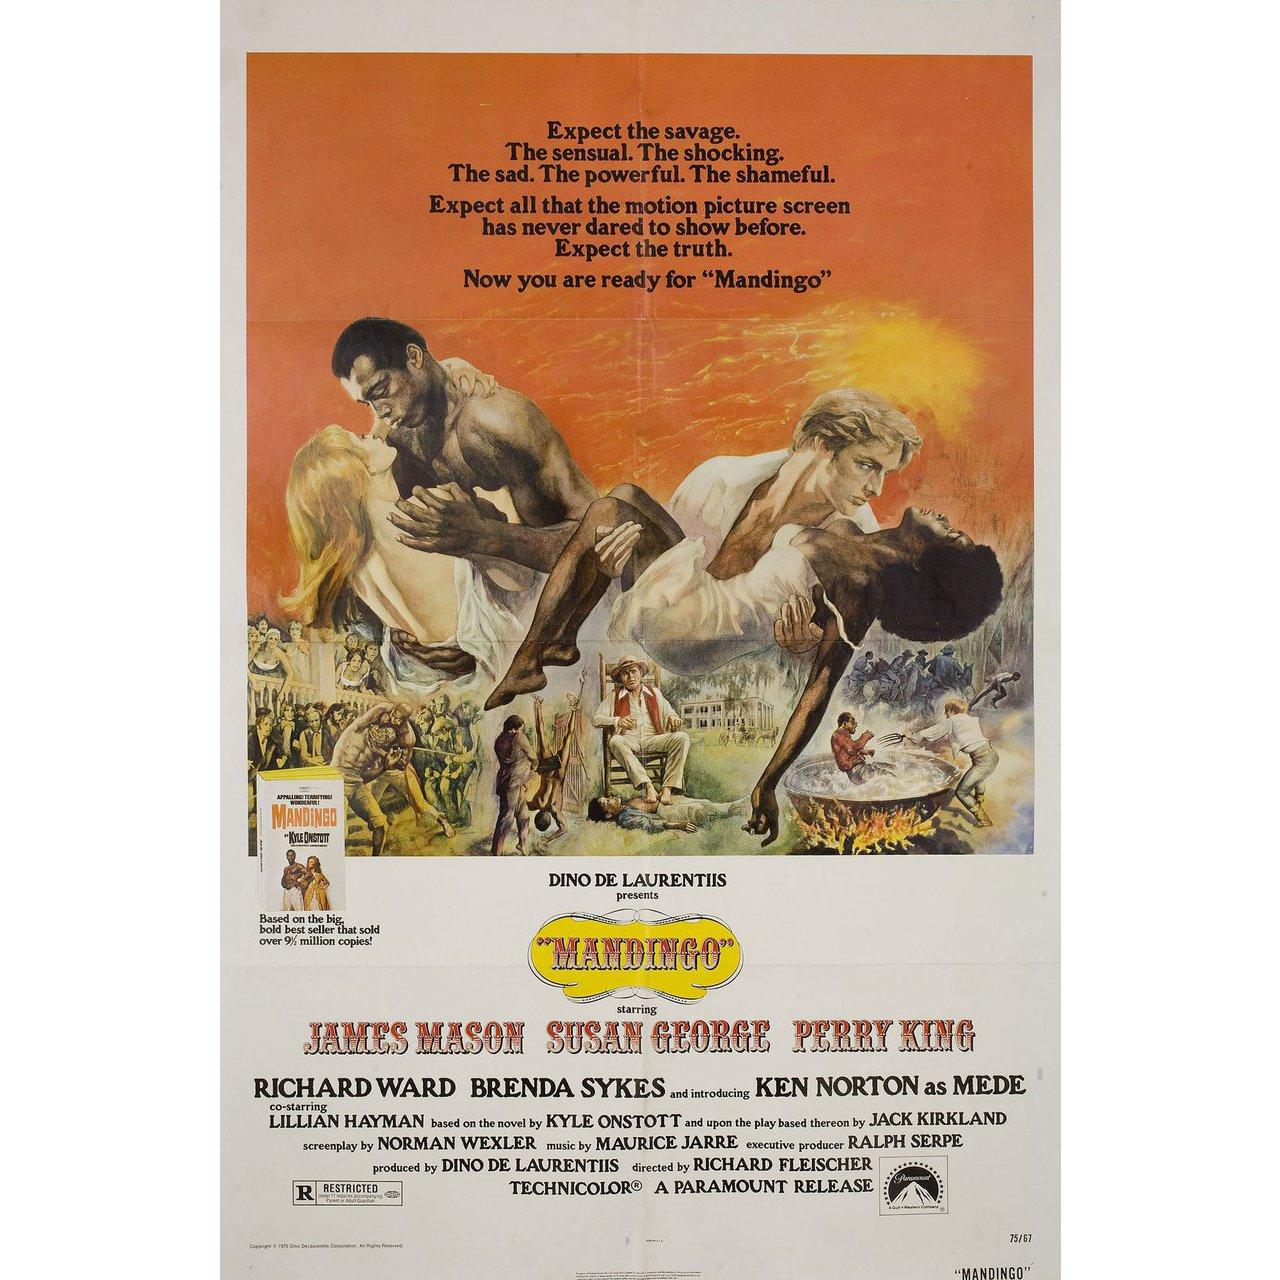 Original 1975 U.S. one sheet poster for the film “Mandingo” directed by Richard Fleischer with James Mason / Susan George / Perry King / Richard Ward. Very good-fine condition, folded. Many original posters were issued folded or were subsequently